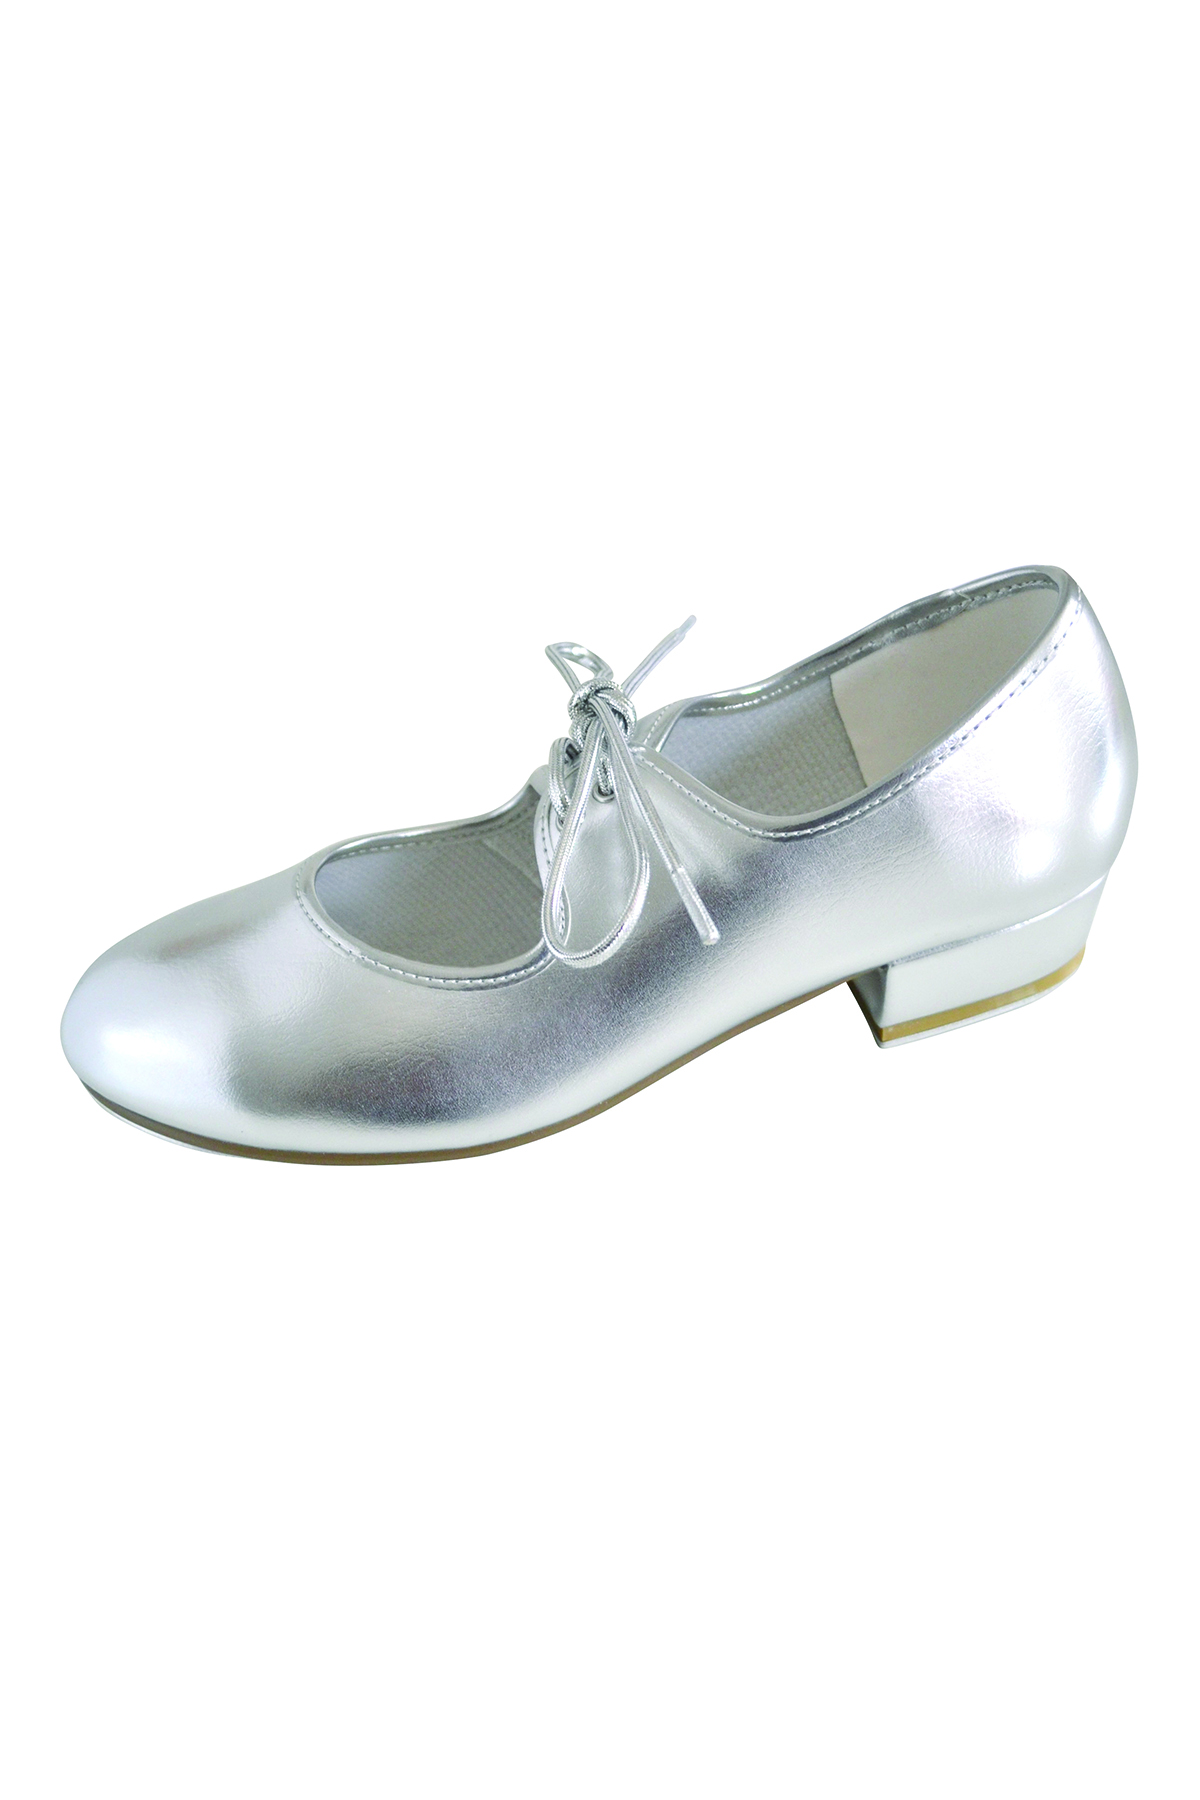 Roch Valley 'LHPS' Silver Tap Shoes 